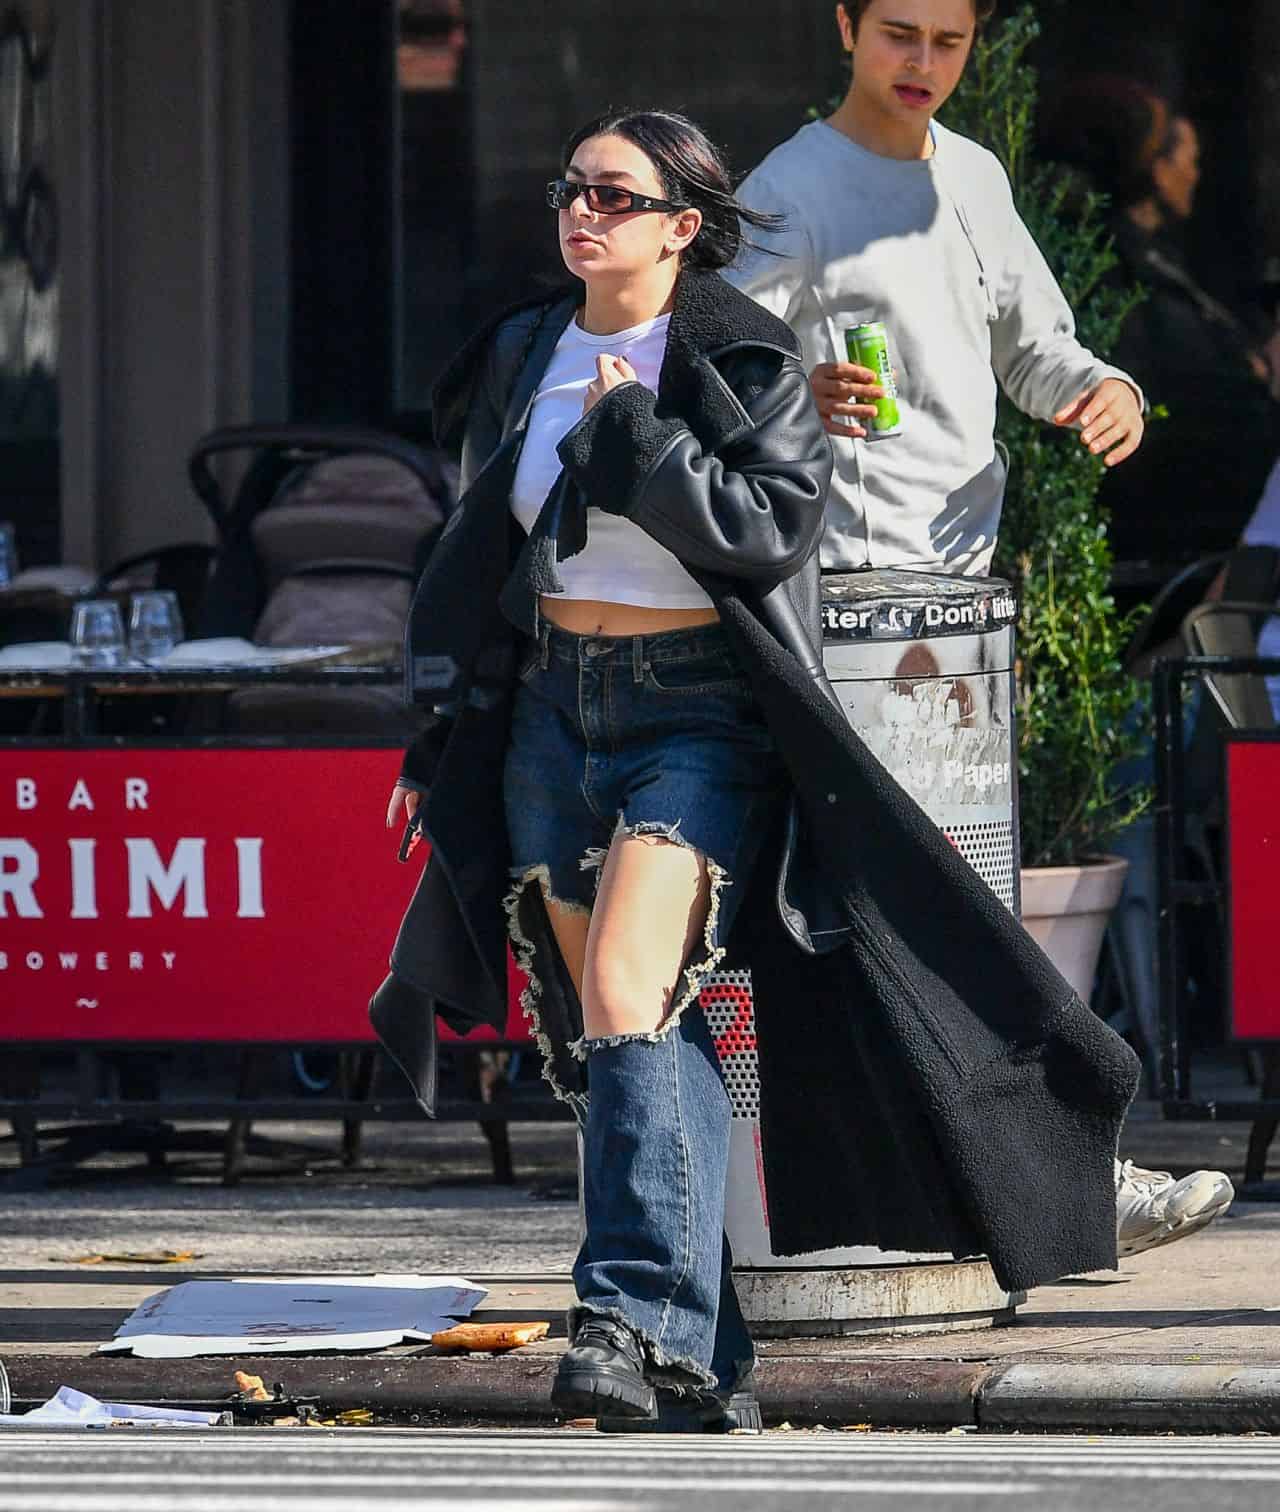 Charli XCX Strolls in Ripped Blue Jeans and a Crop Top Without a Bra in NY